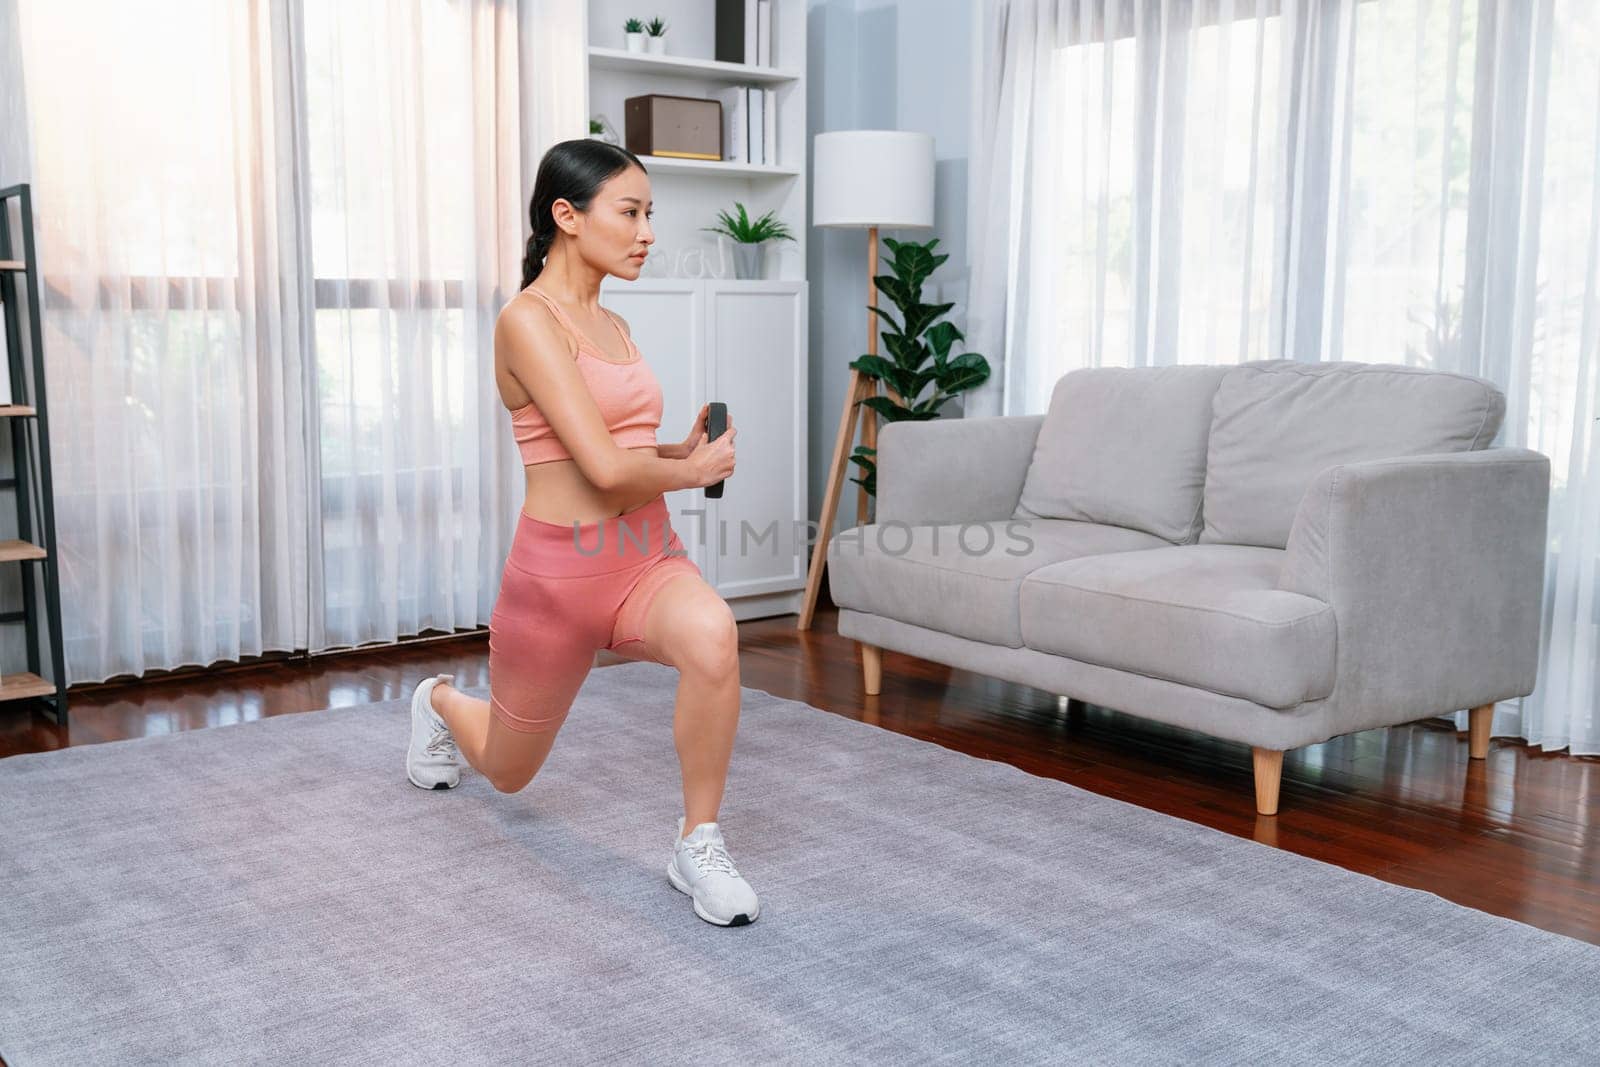 Vigorous energetic woman doing yoga and weight lifting exercise at home. Young athletic asian woman strength and endurance training session as home workout routine.